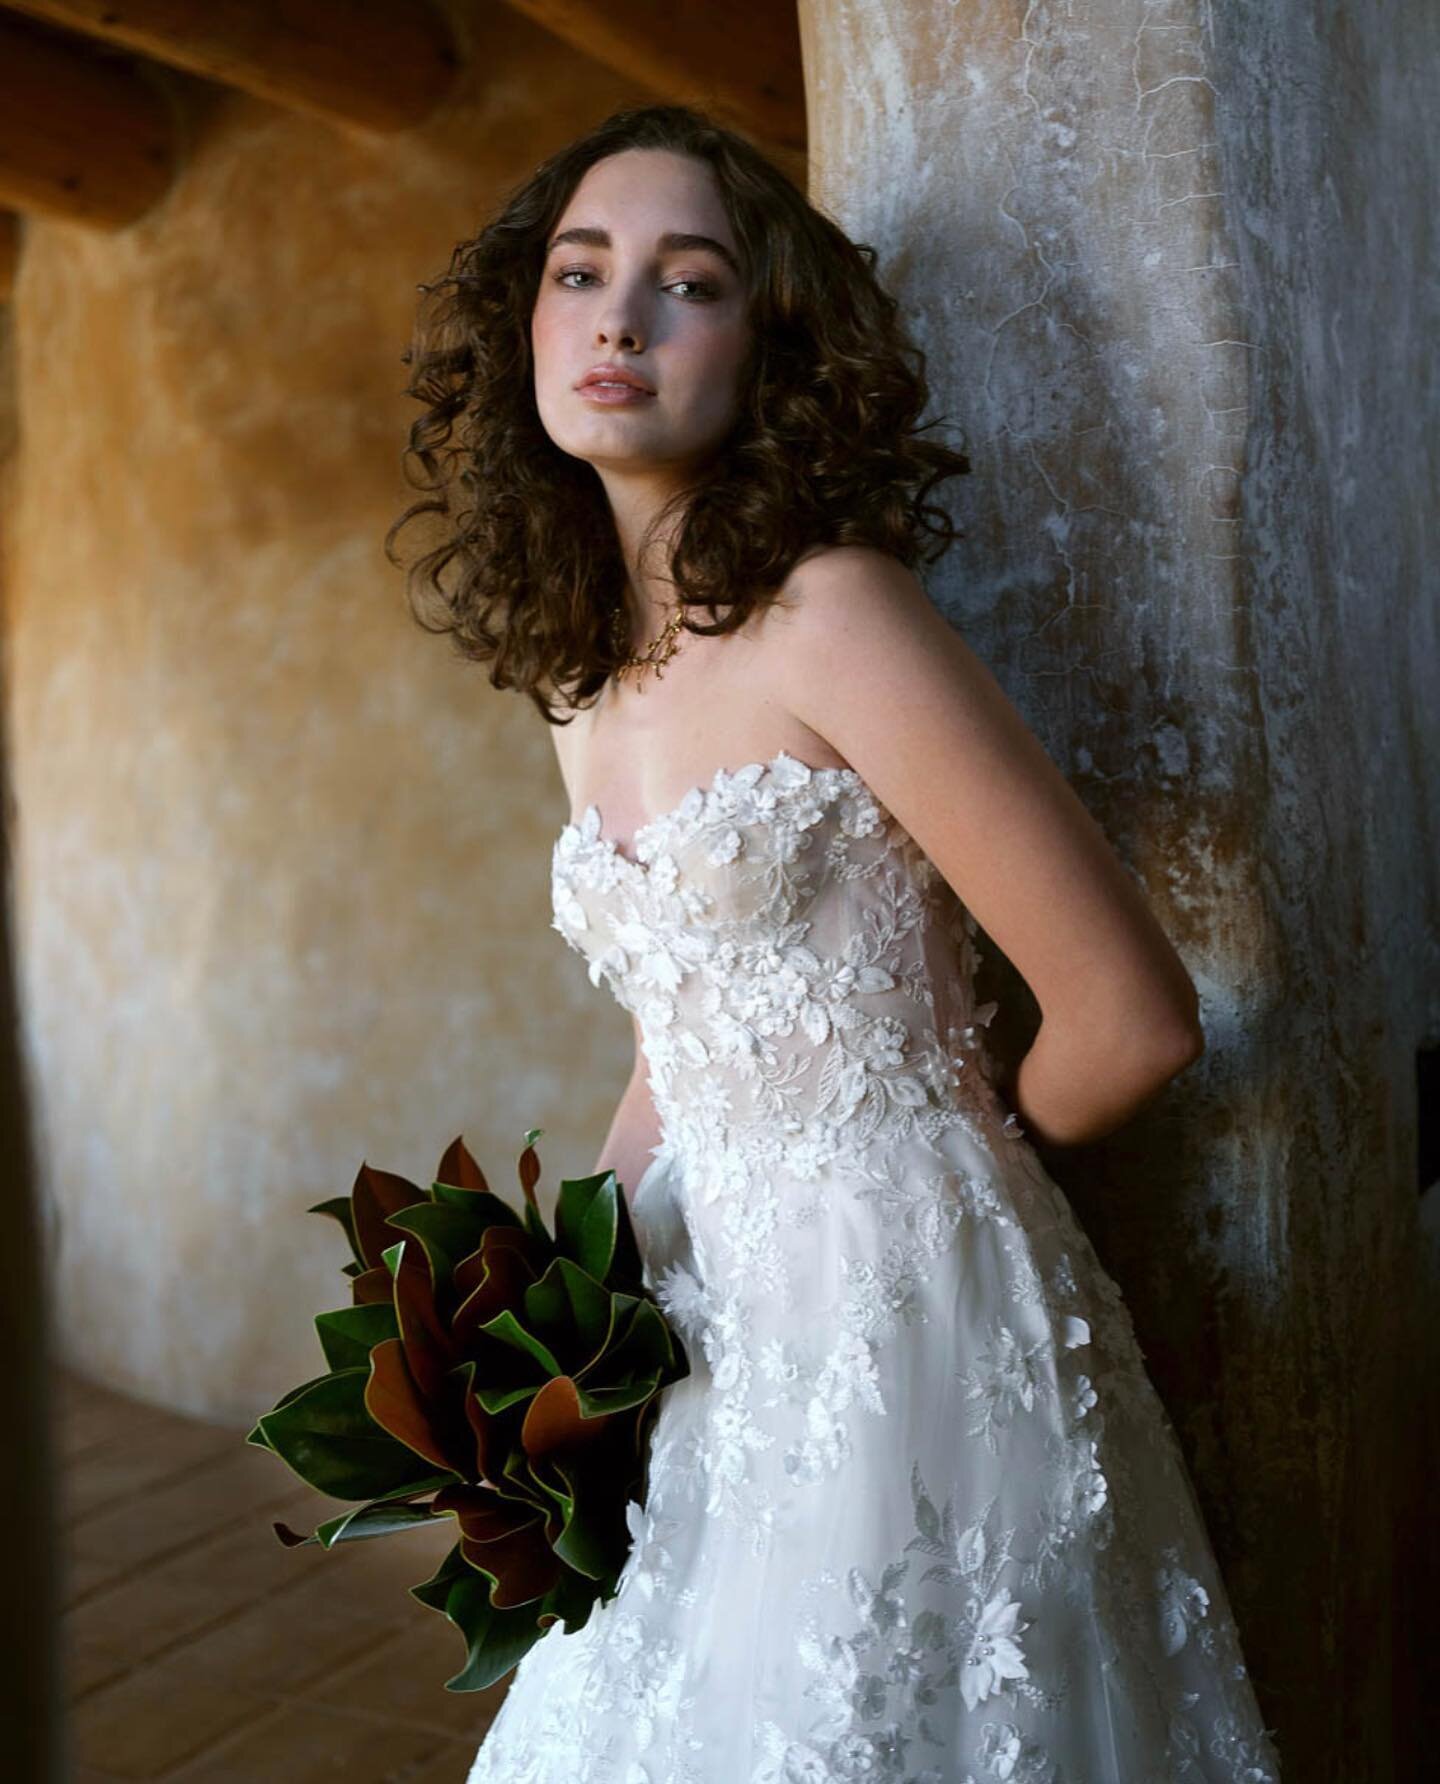 Sweetbrier and wild roses bloom with abandon. 

The Briar is an enchanting romantic gown in a delicate floral French lace over layers of silk organza. Hand embroidered petals, leaves and pearls envelope the fitted bodice and give way to a full skirt 